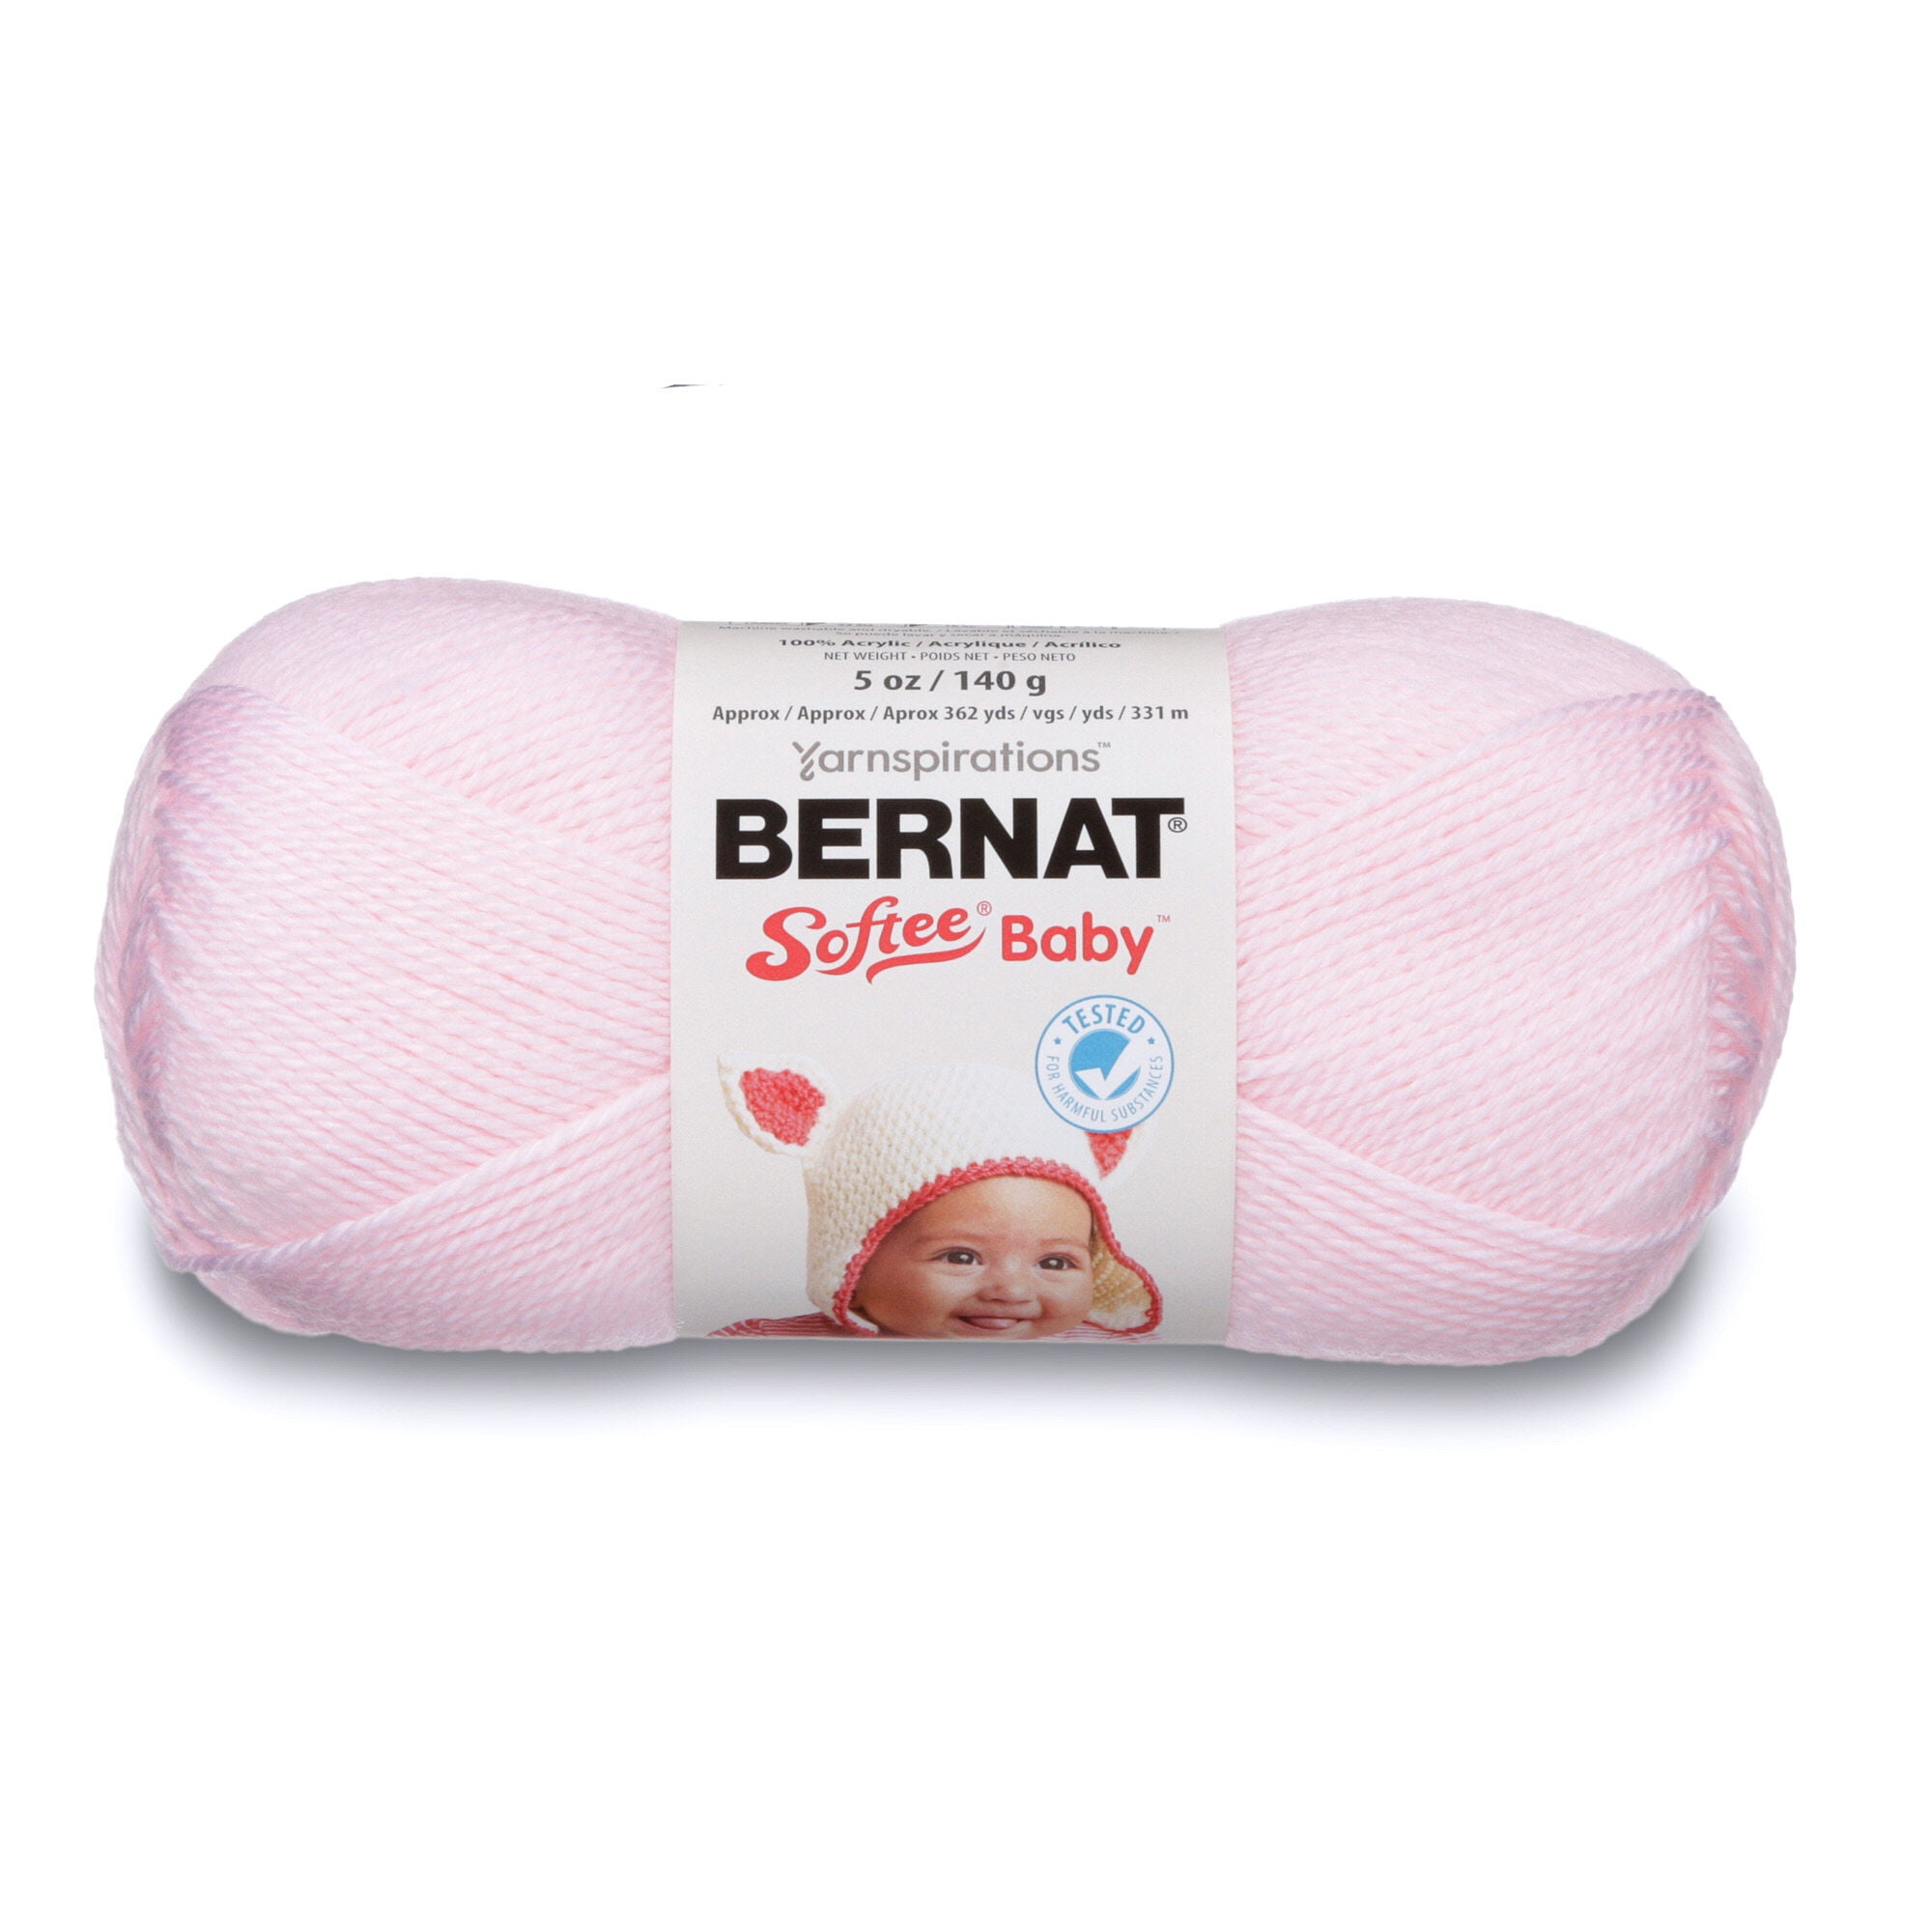 Bernat Softee Baby Yarn Little Mouse No Dye Lot Discontinued New and Unused  Price is per Skein 